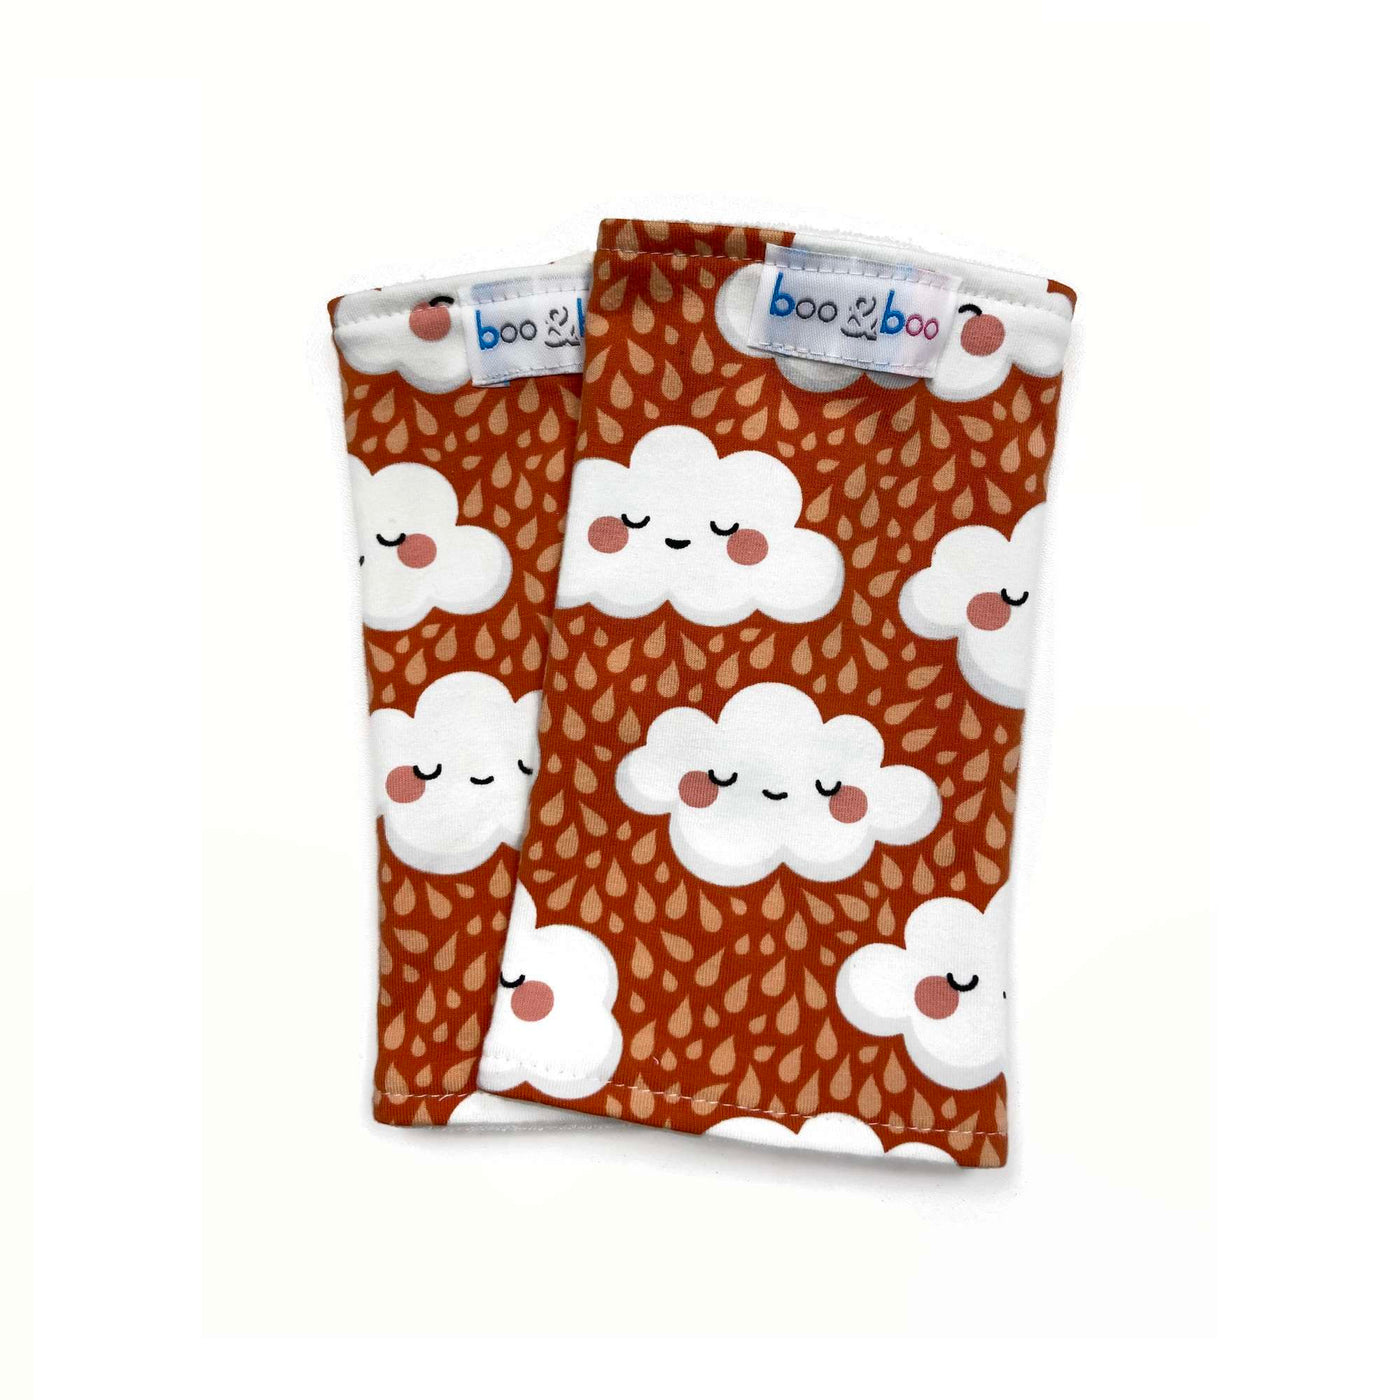 Boo&Boo Cuddly Strap Protectors (2 Pack) - clouds orange (2)